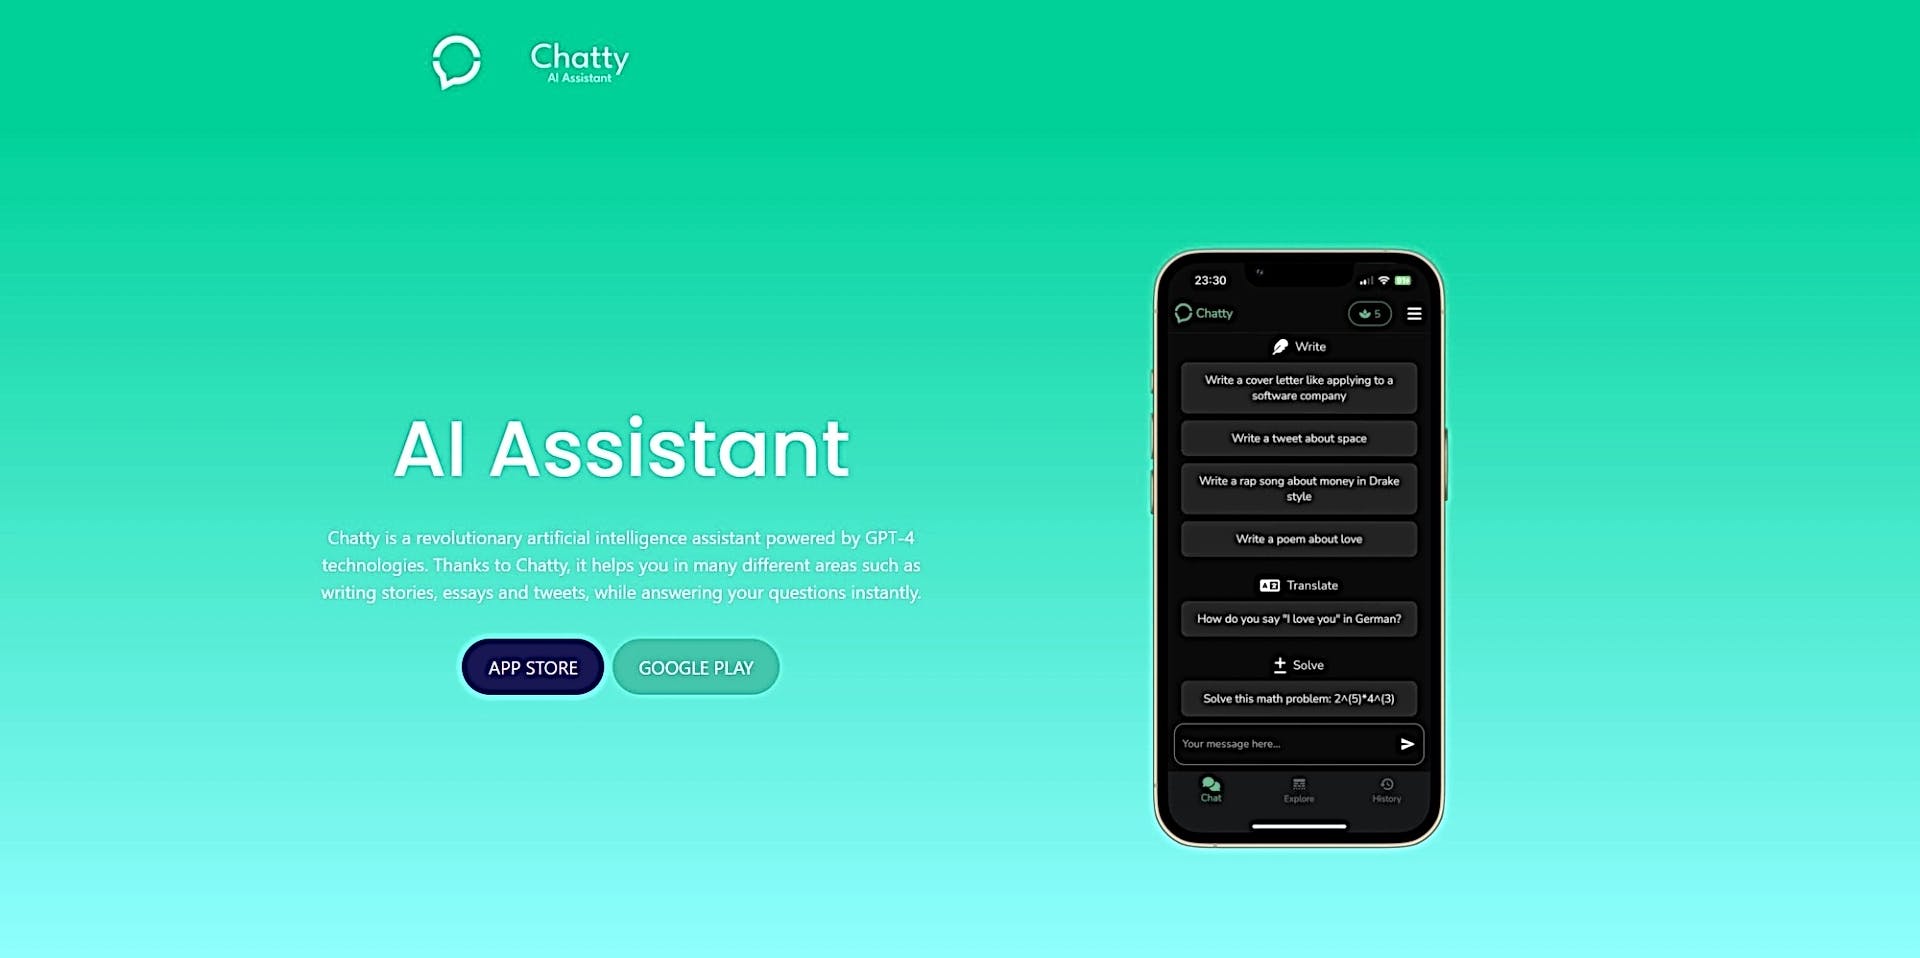 Chatty featured